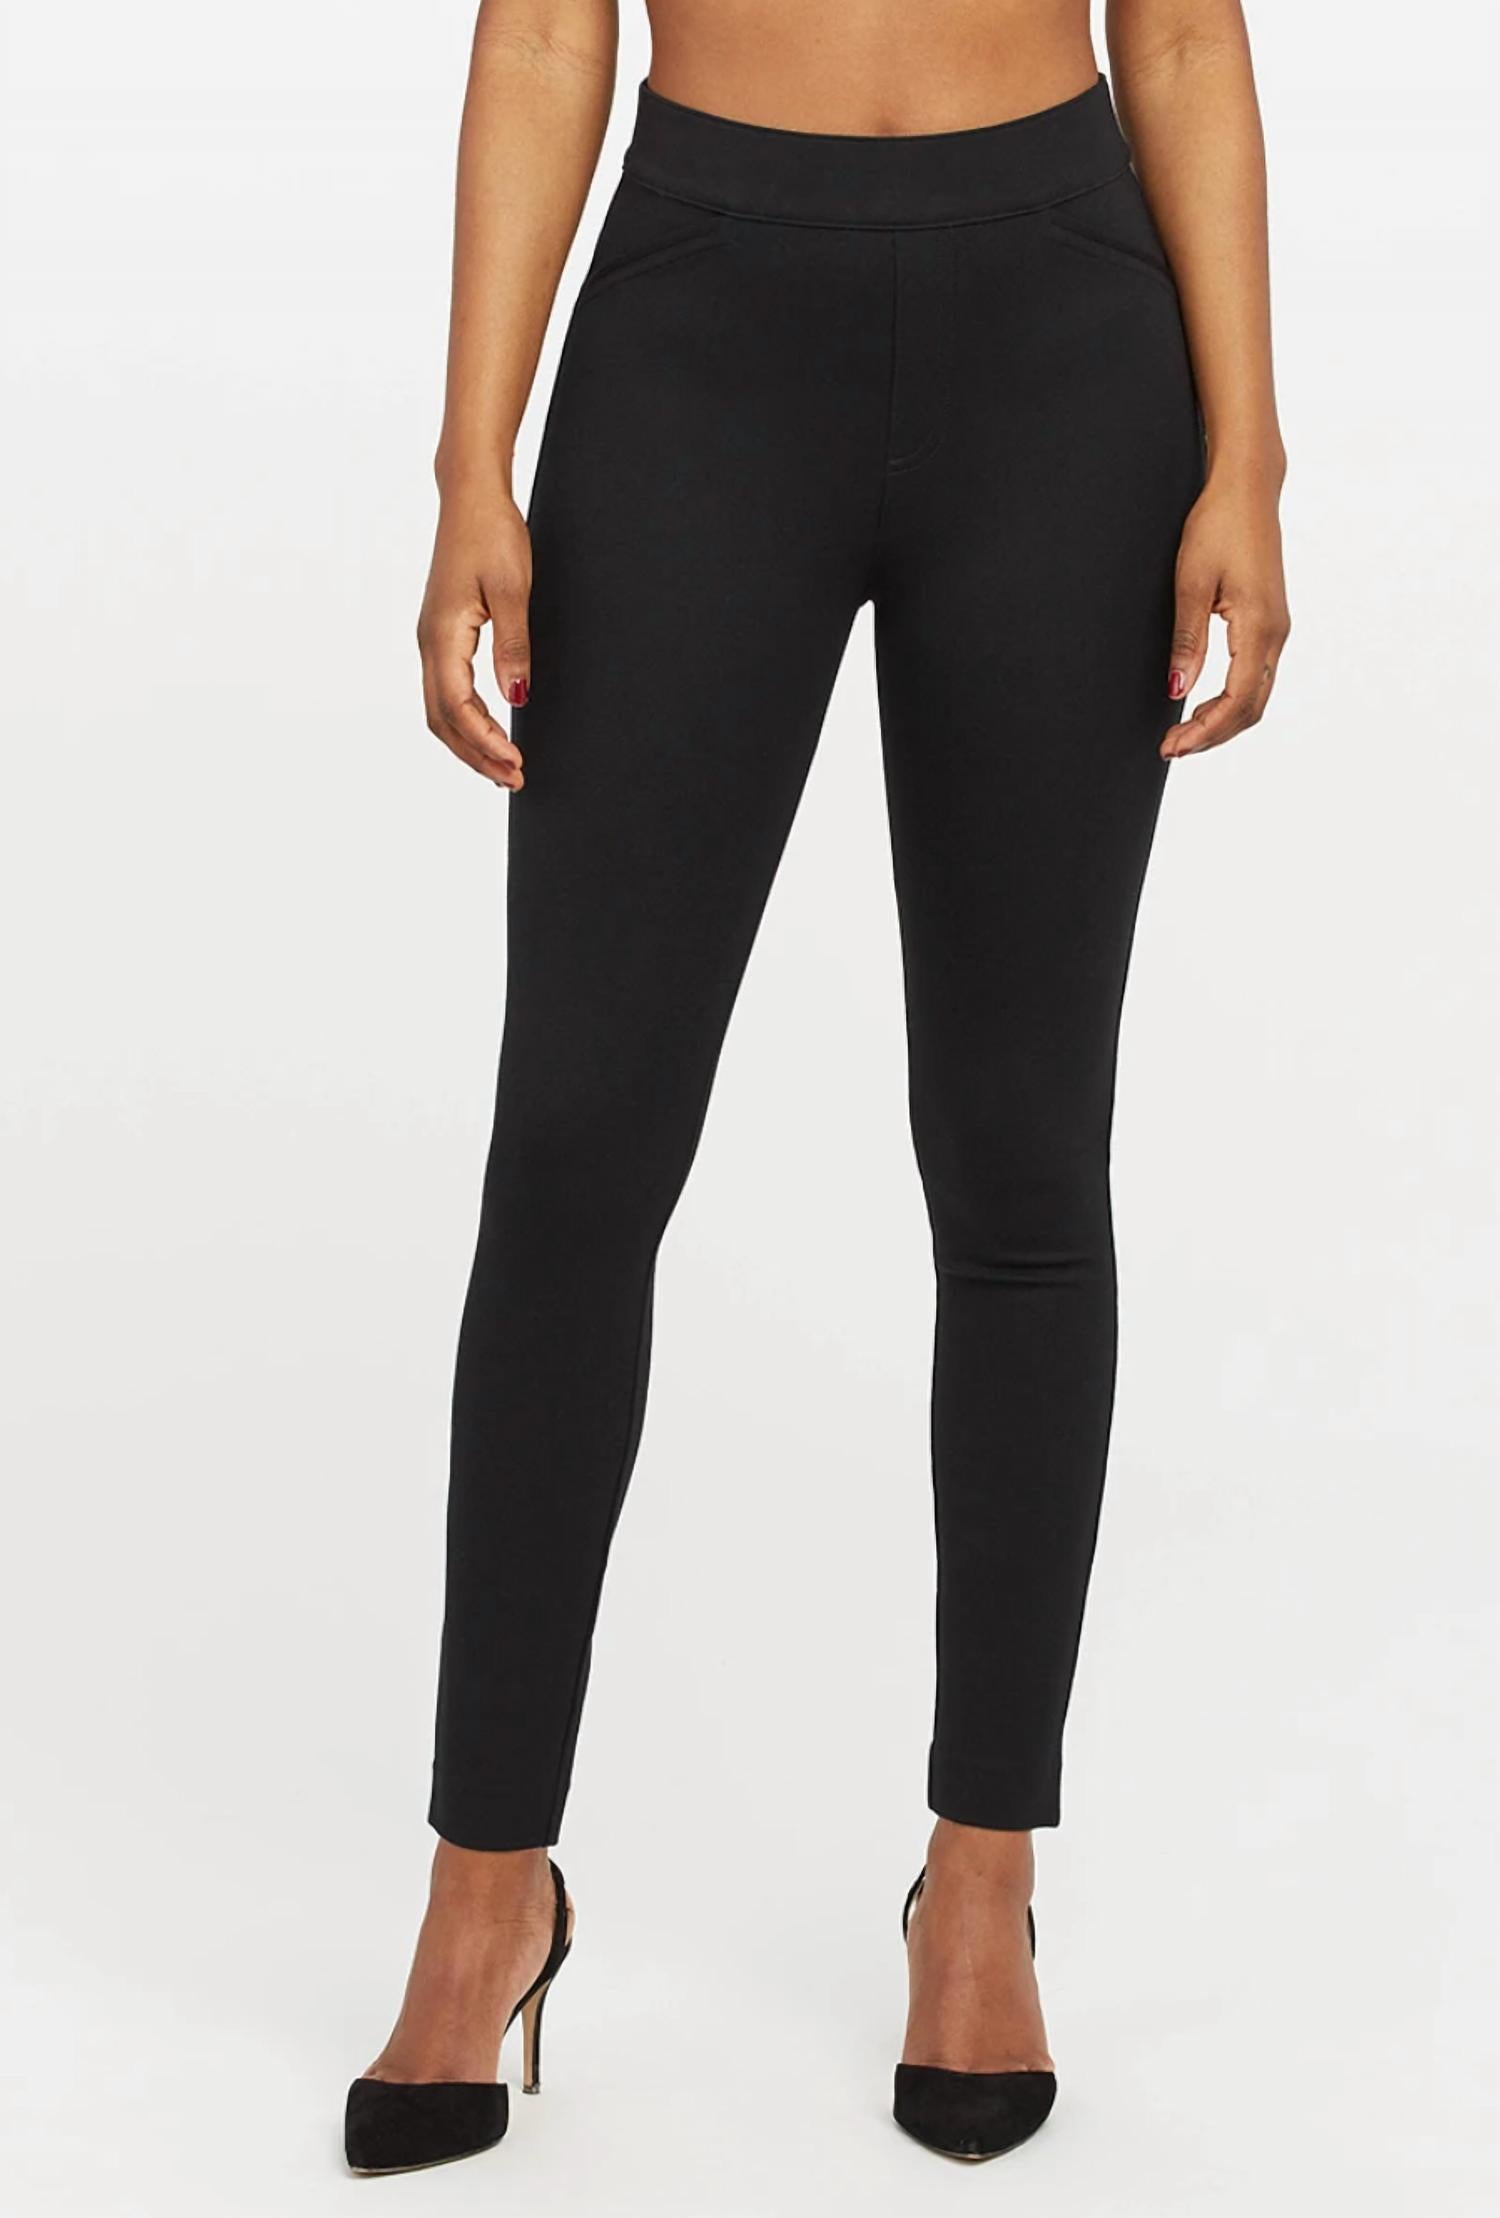 SPANX The Perfect Black Pant, Ankle 4-Pocket in Classic Black